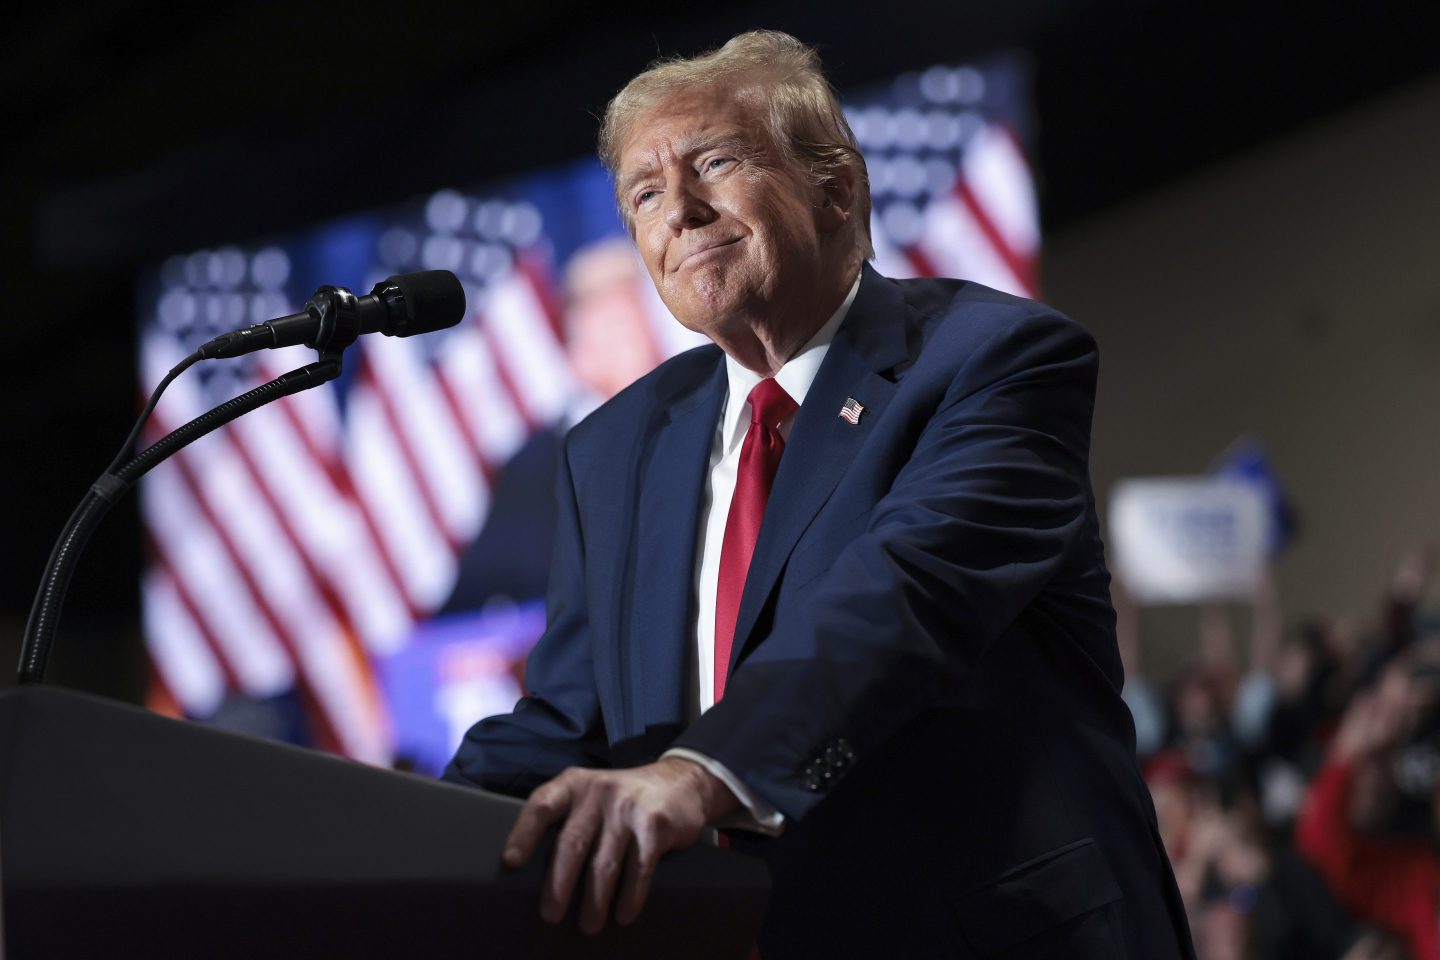 RICHMOND, VIRGINIA &#8211; MARCH 02: Republican presidential candidate and former President Donald Trump speaks during a Get Out the Vote Rally March 2, 2024 in Richmond, Virginia. Sixteen states, including Virginia, will vote during Super Tuesday on March 5. (Photo by Win McNamee/Getty Images)